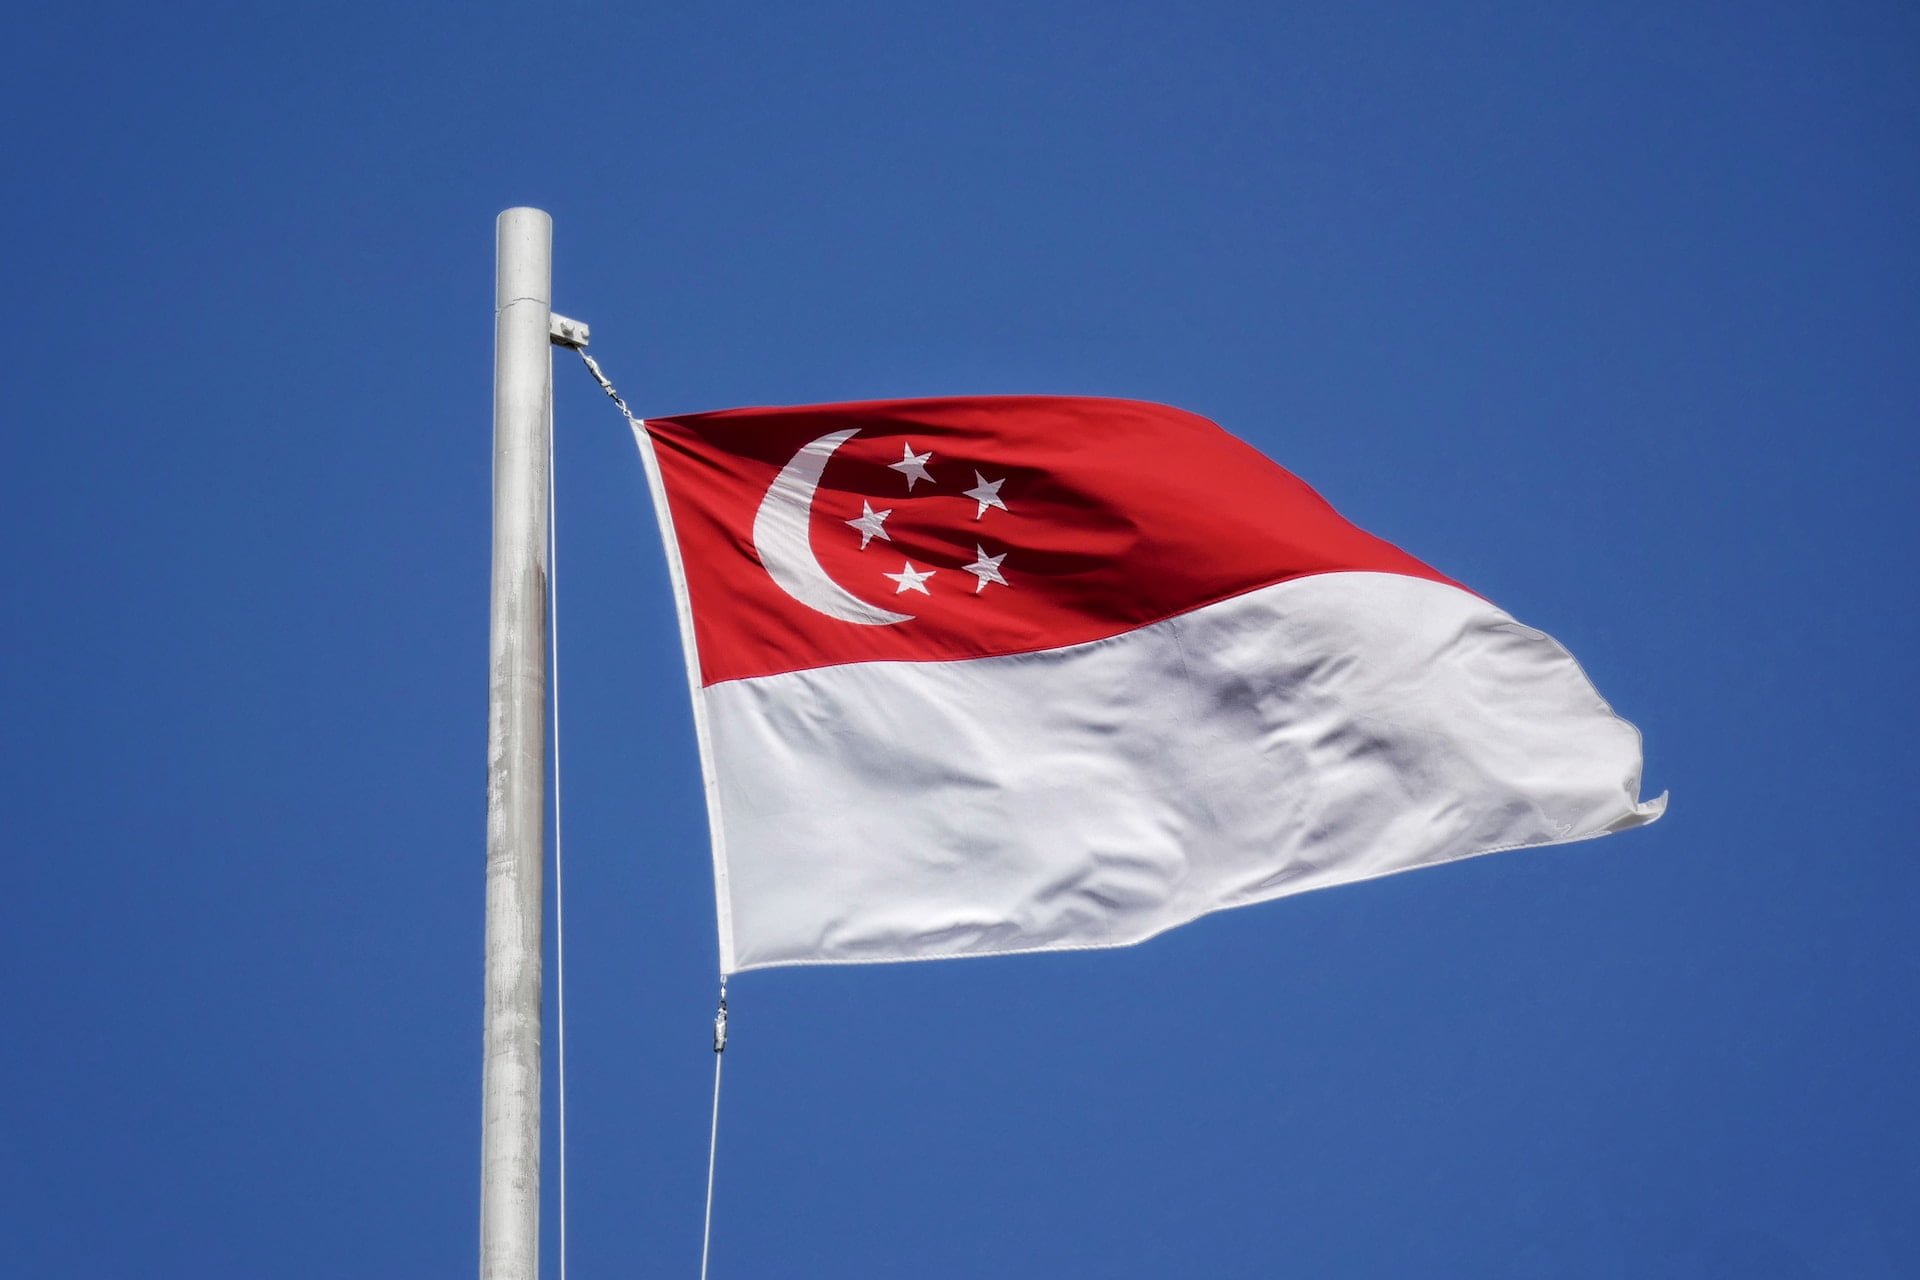 Ripple Secures Regulatory Approval for Digital Asset Services in Singapore